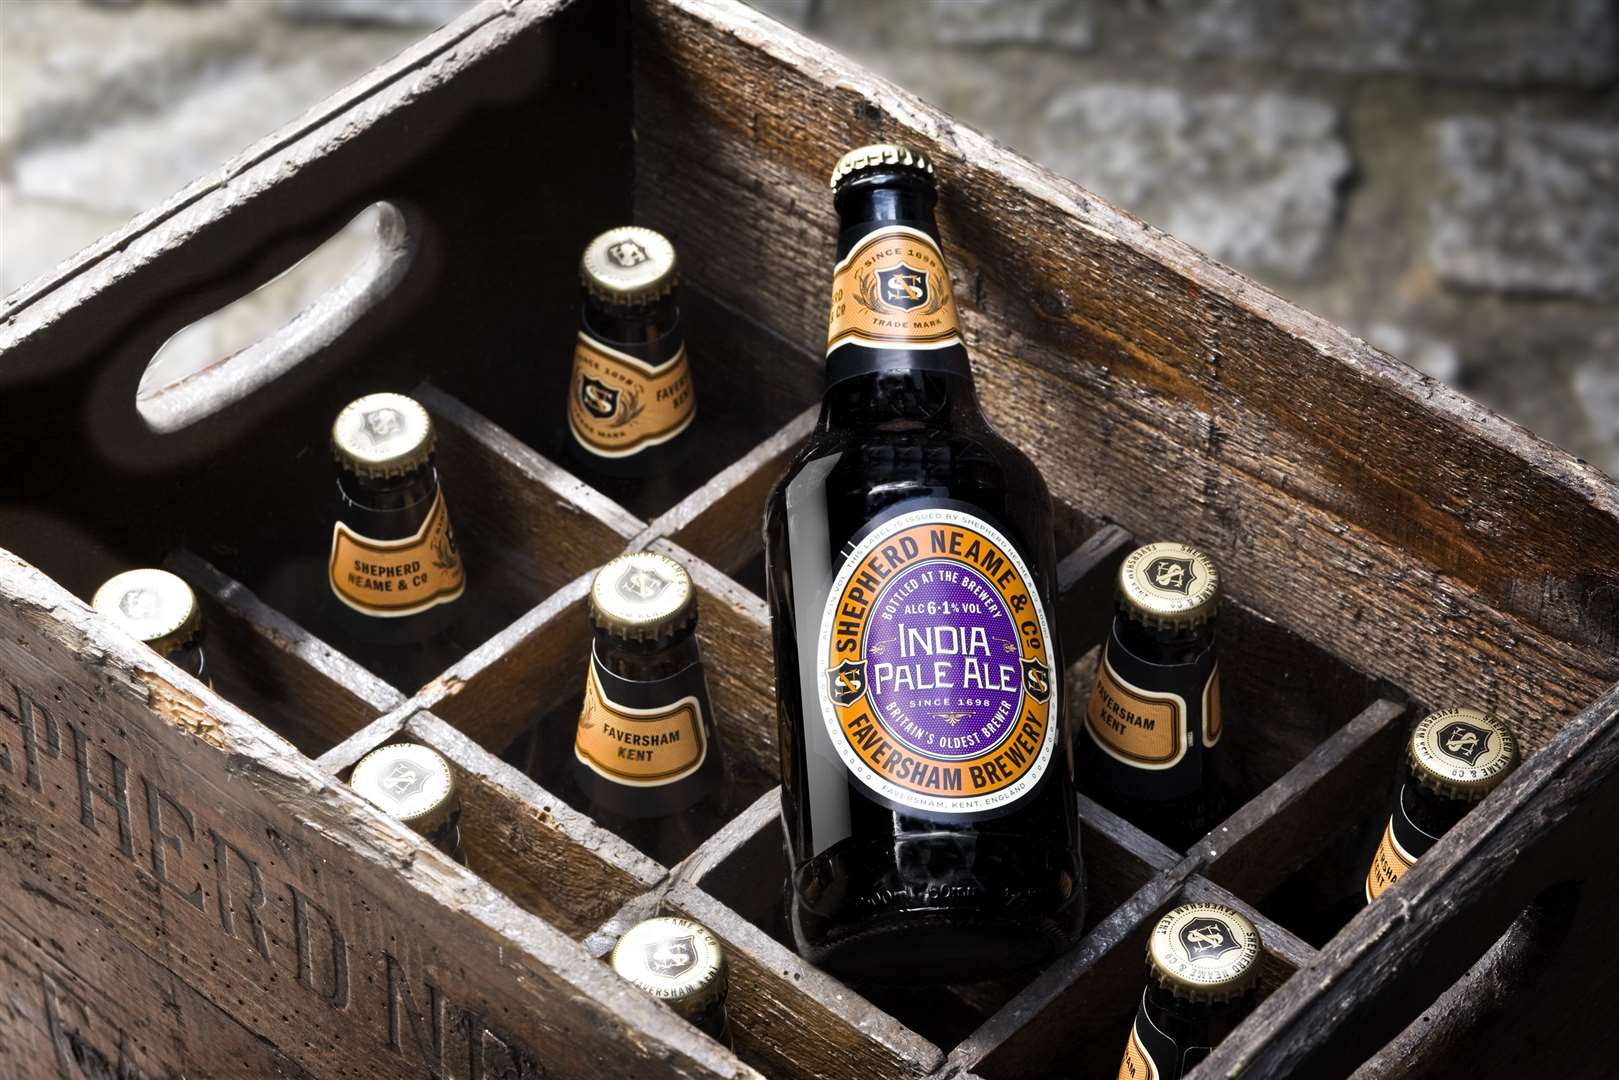 Shepherd Neame has been given awards for its Indian Pale Ale